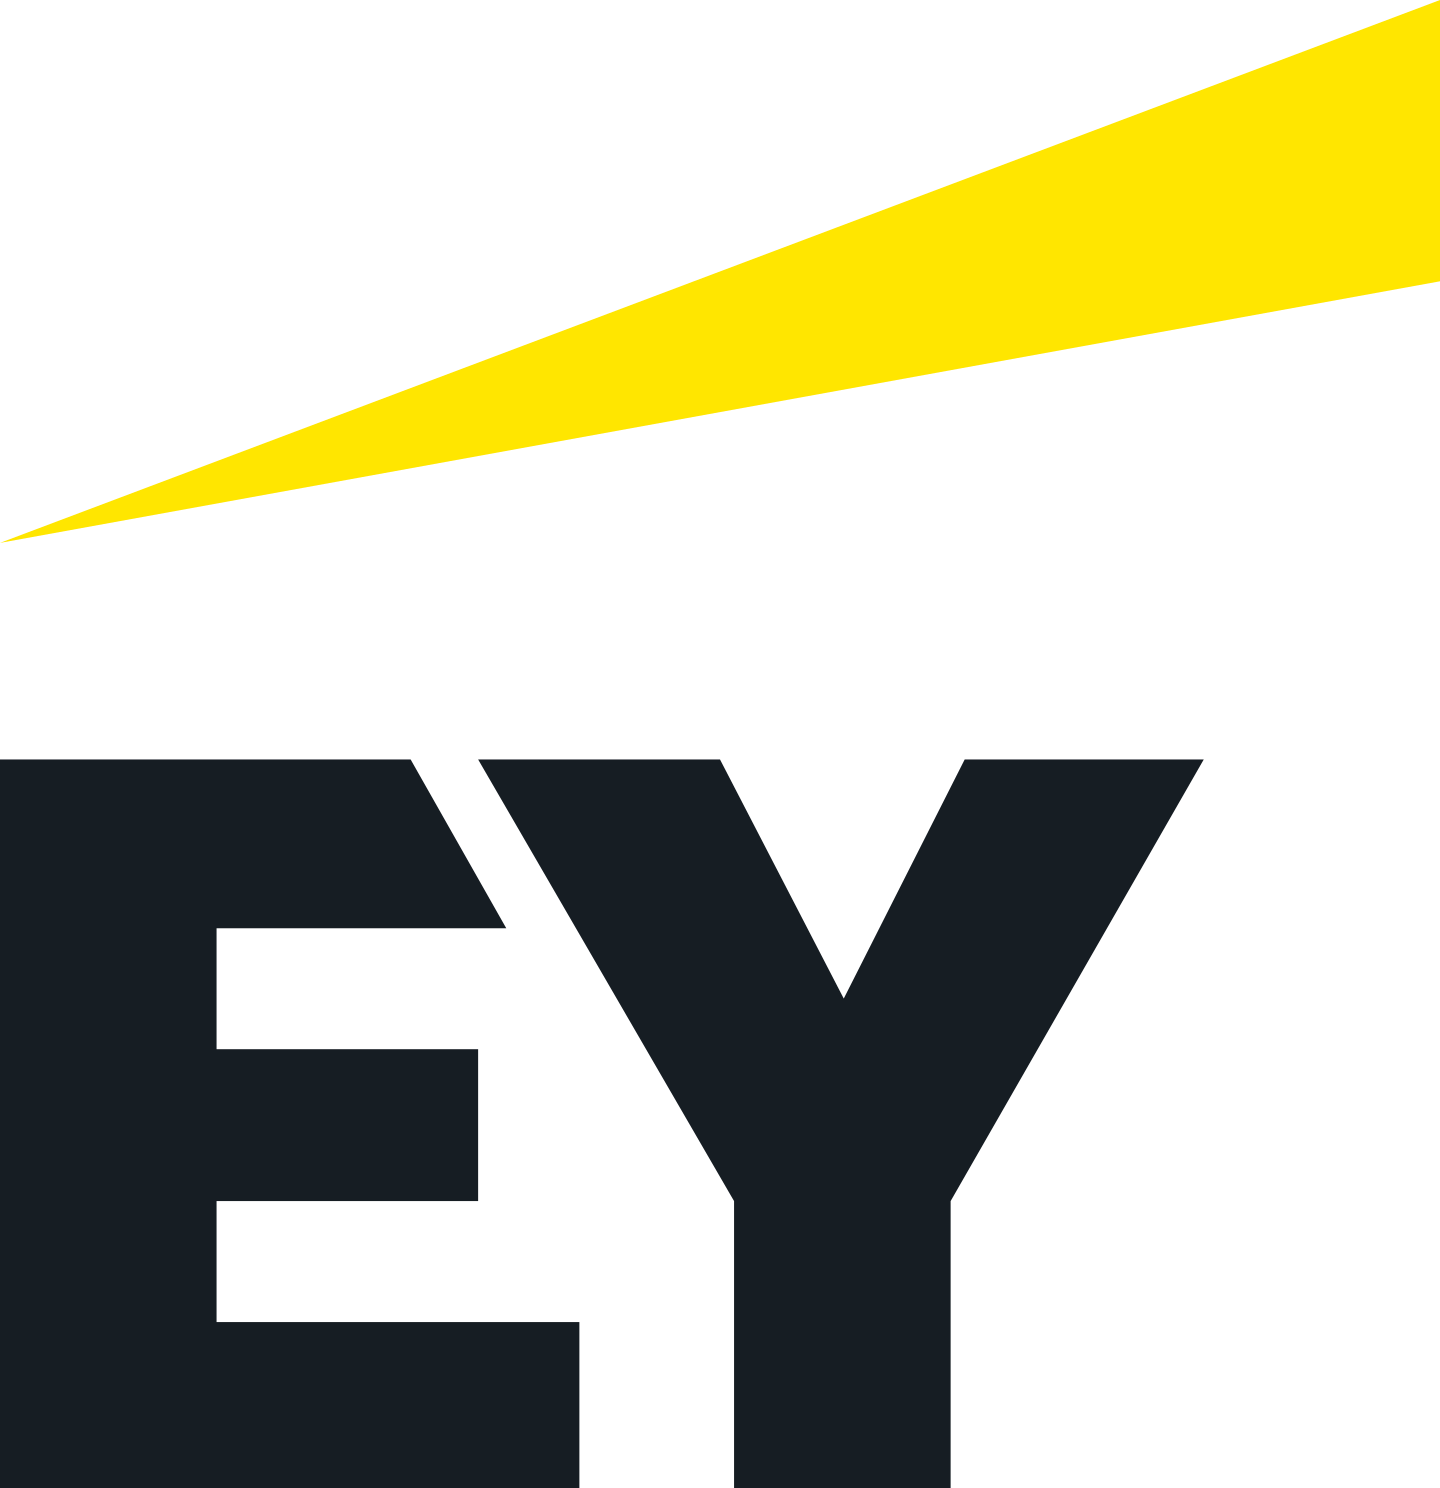 Ernst & Young Logo - PNG and Vector - Logo Download